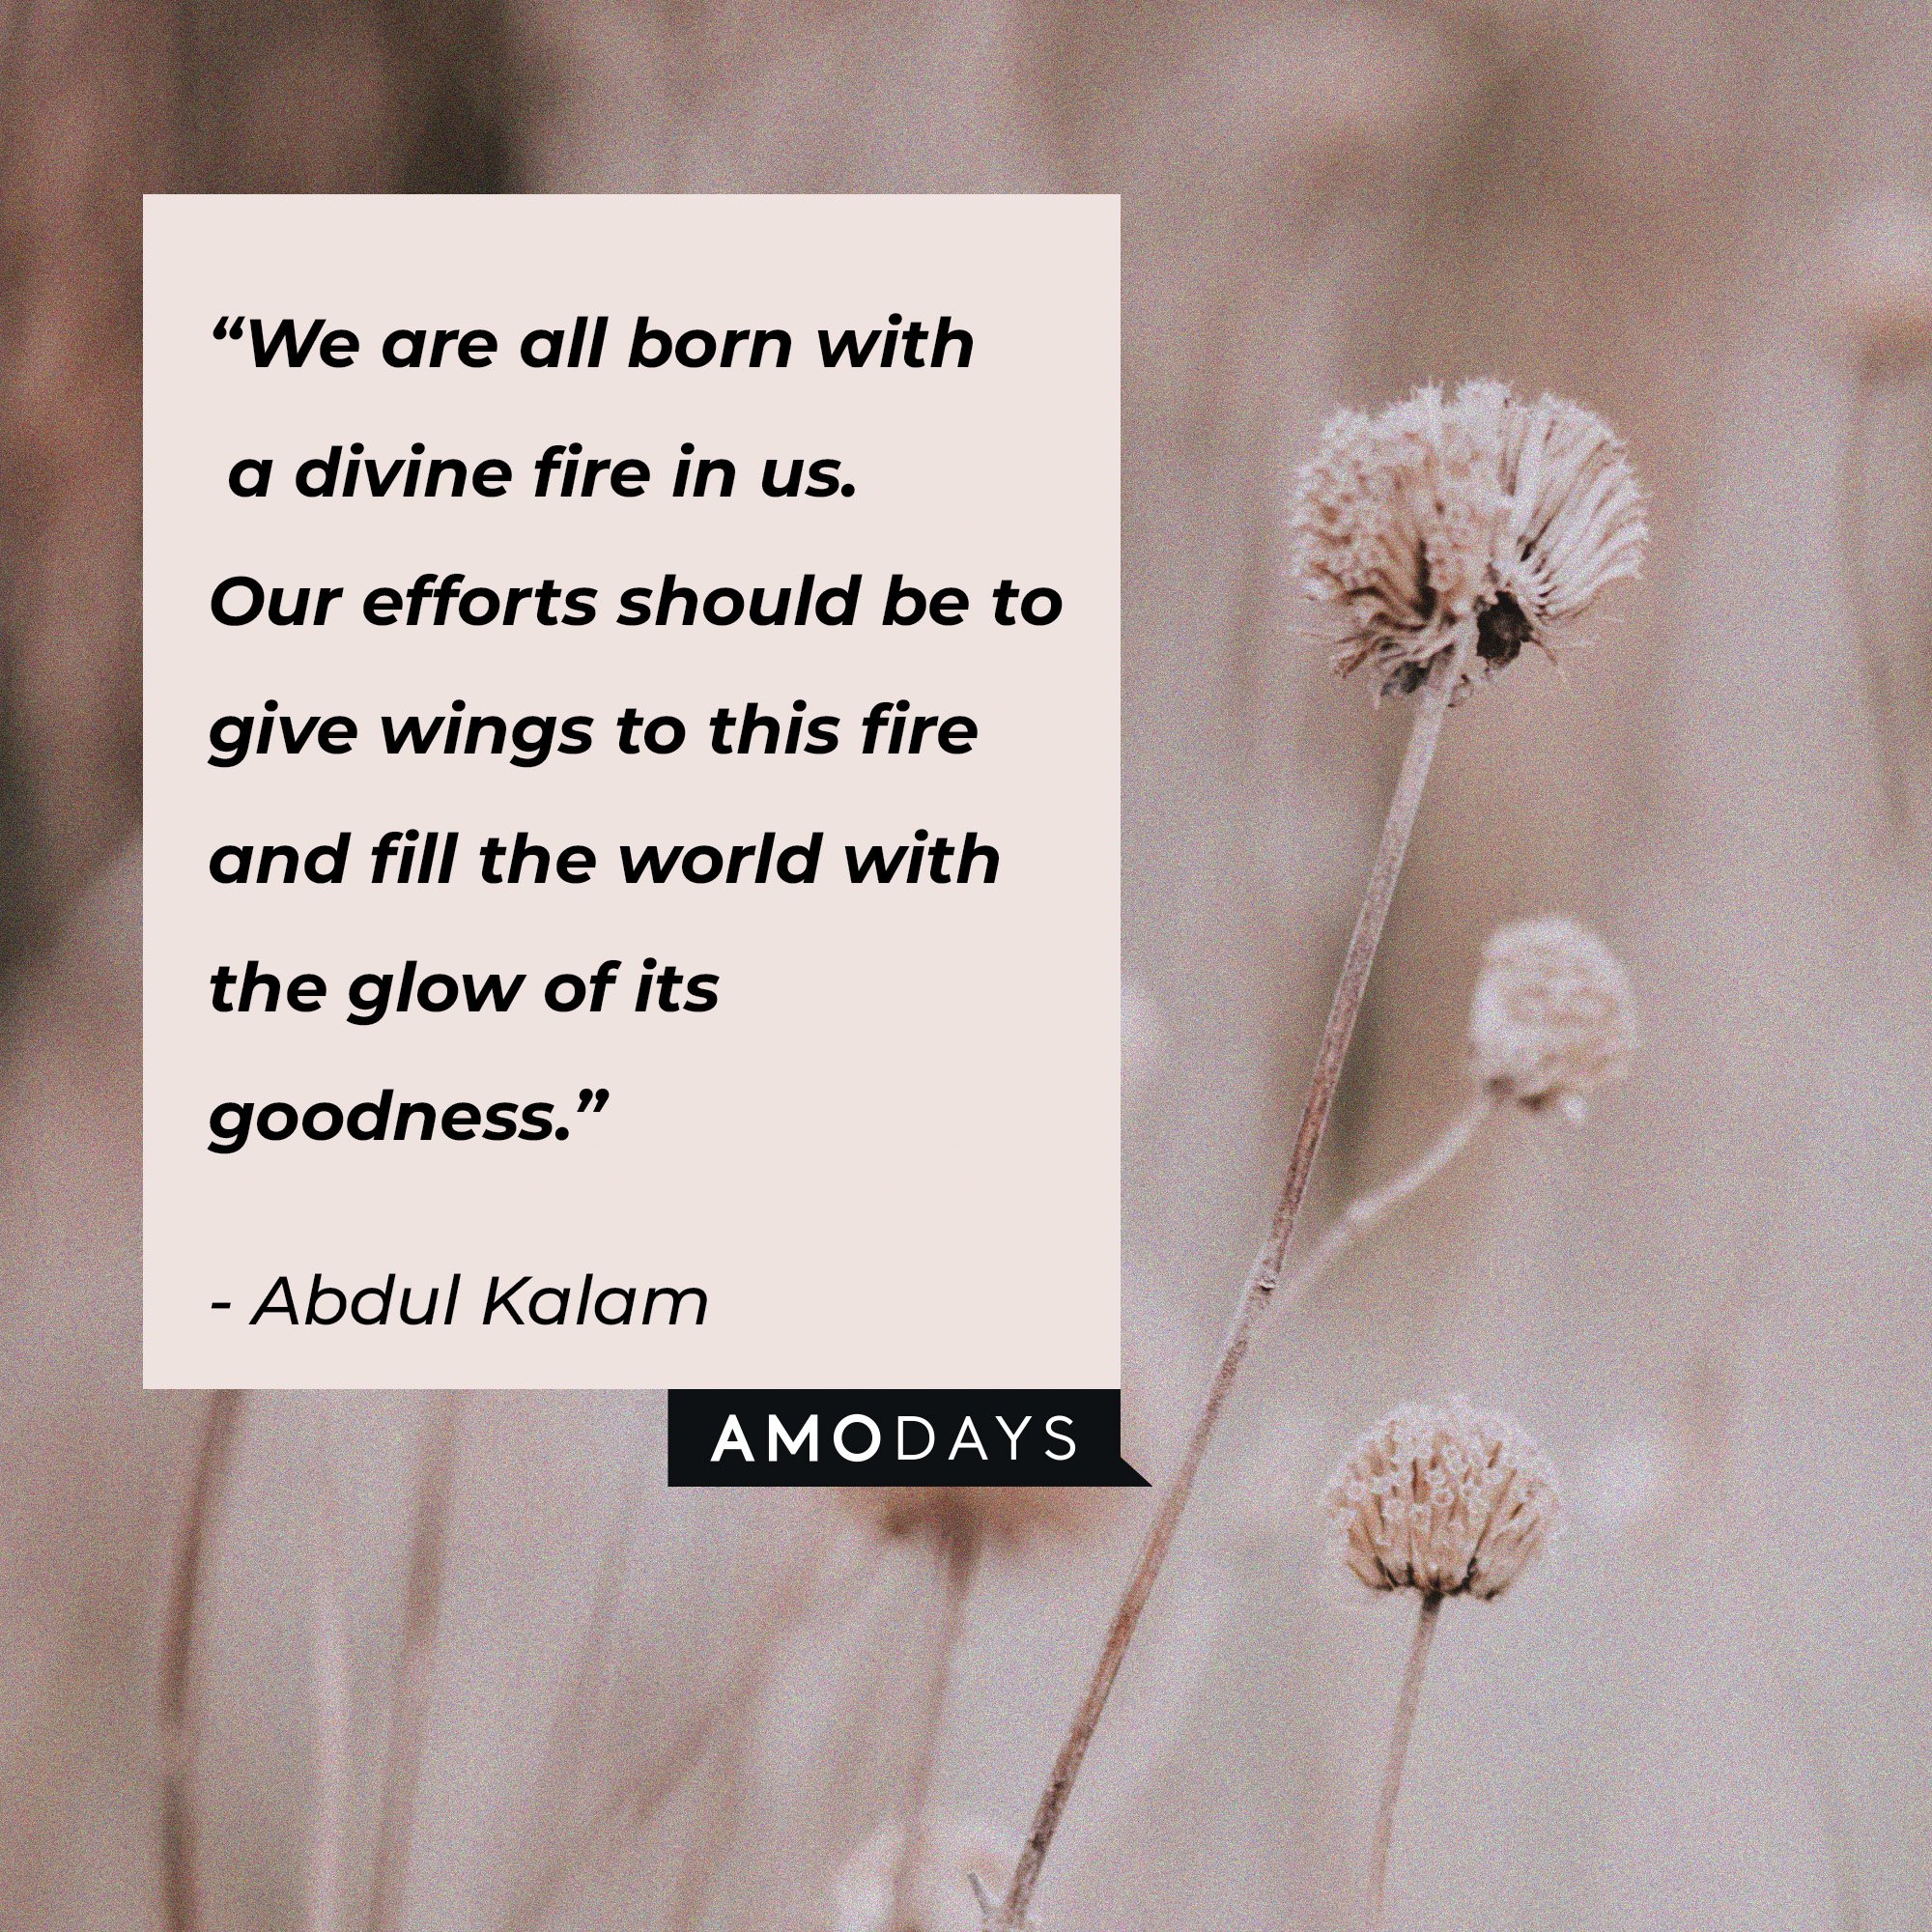 Abdul Kalam's quote: “We are all born with a divine fire in us. Our efforts should be to give wings to this fire and fill the world with the glow of its goodness.” | Image: AmoDays